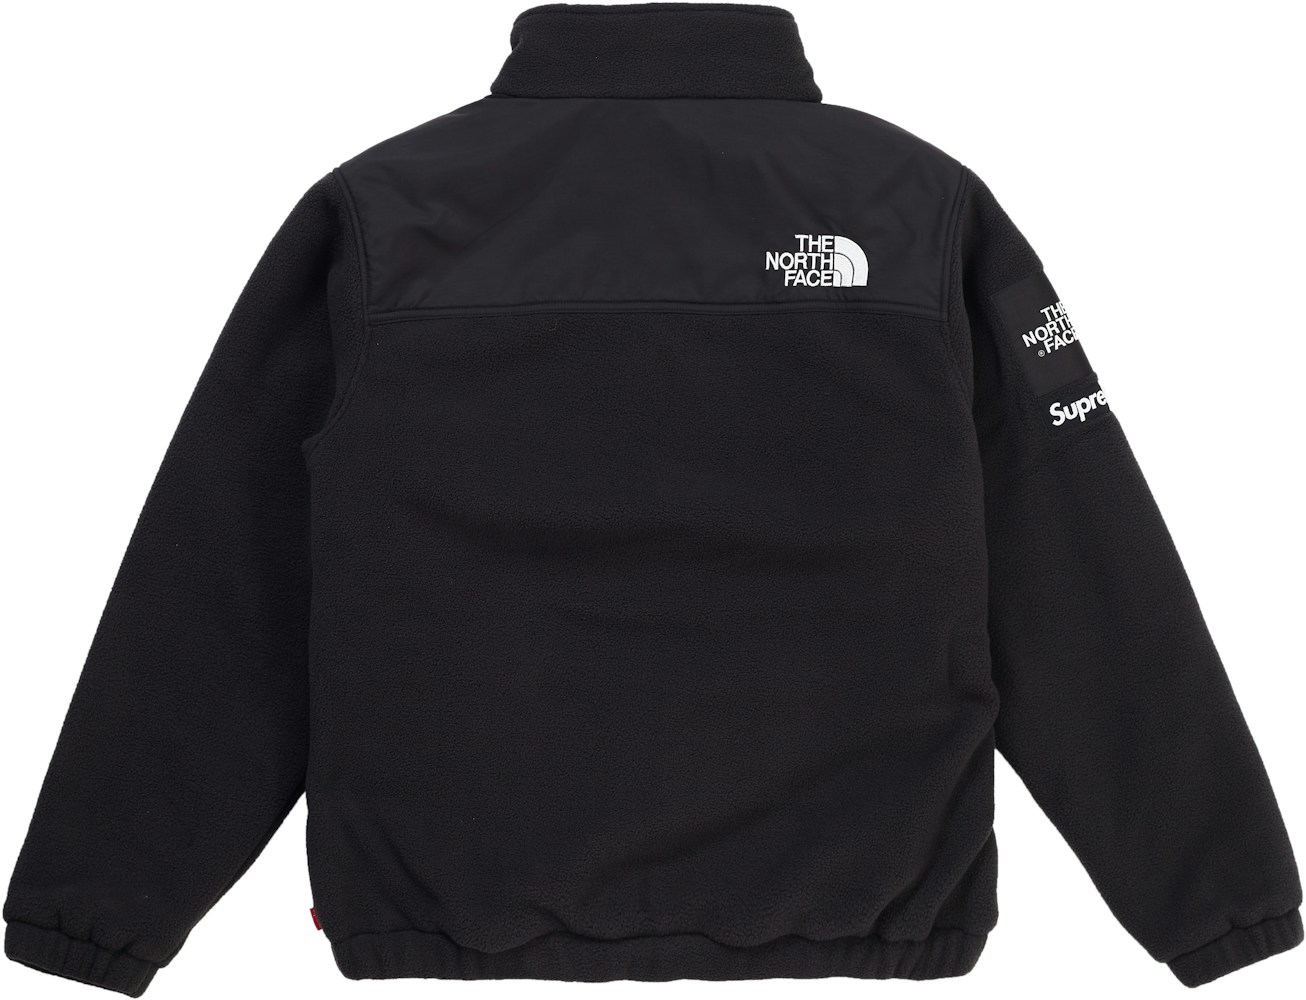 Supreme The North Face Expedition Fleece (FW18) Jacket Black - FW18